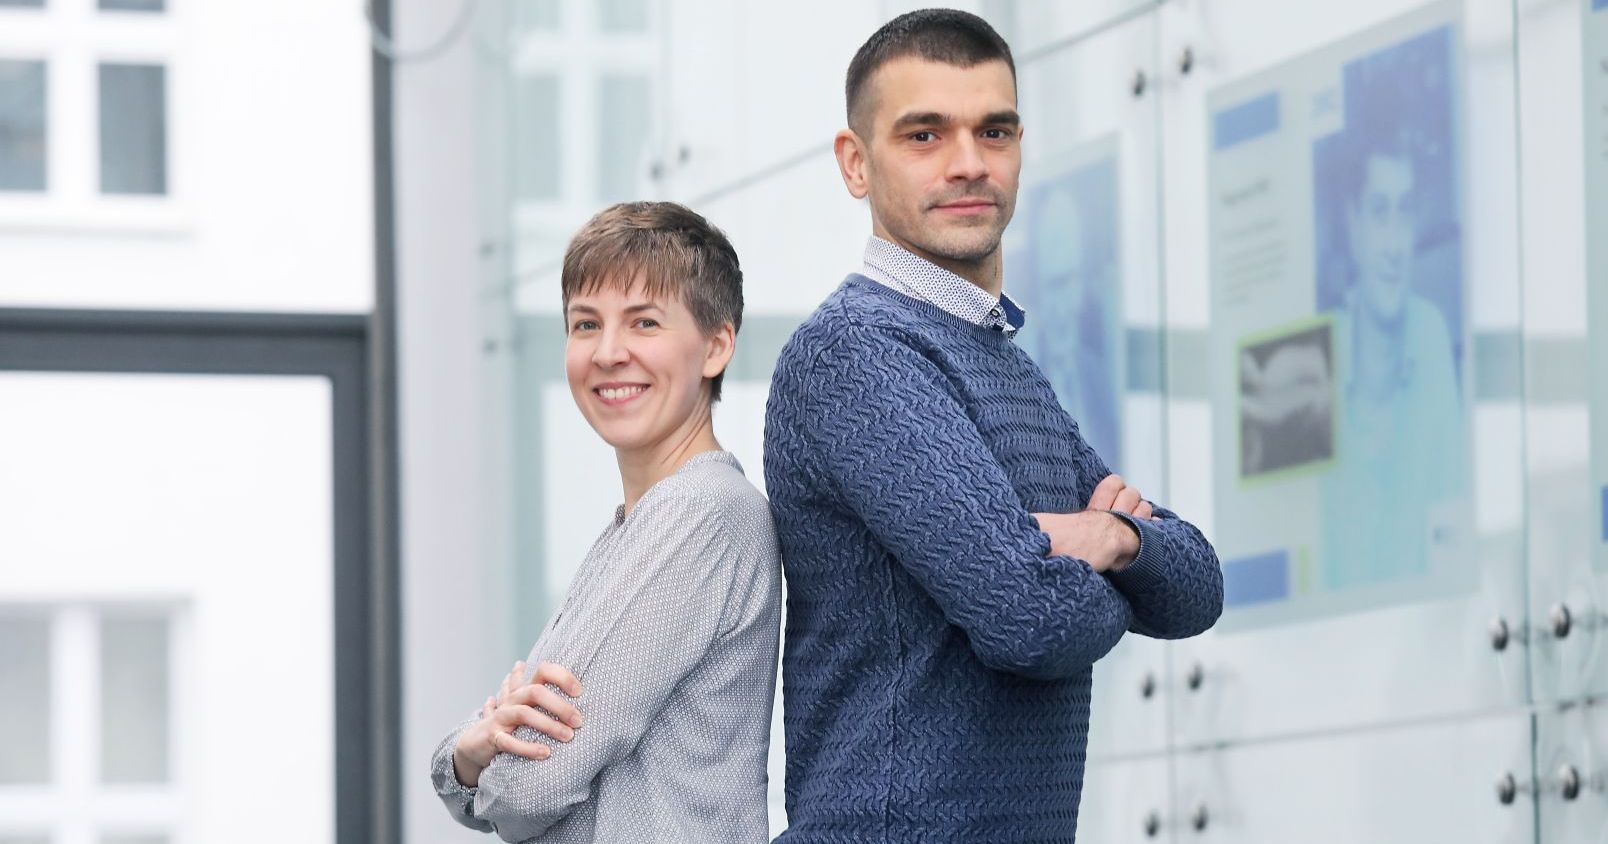 Prof. Katharina Boguslawski and Prof. Piotr Wcisło from the Faculty of Physics, Astronomy and Informatics 